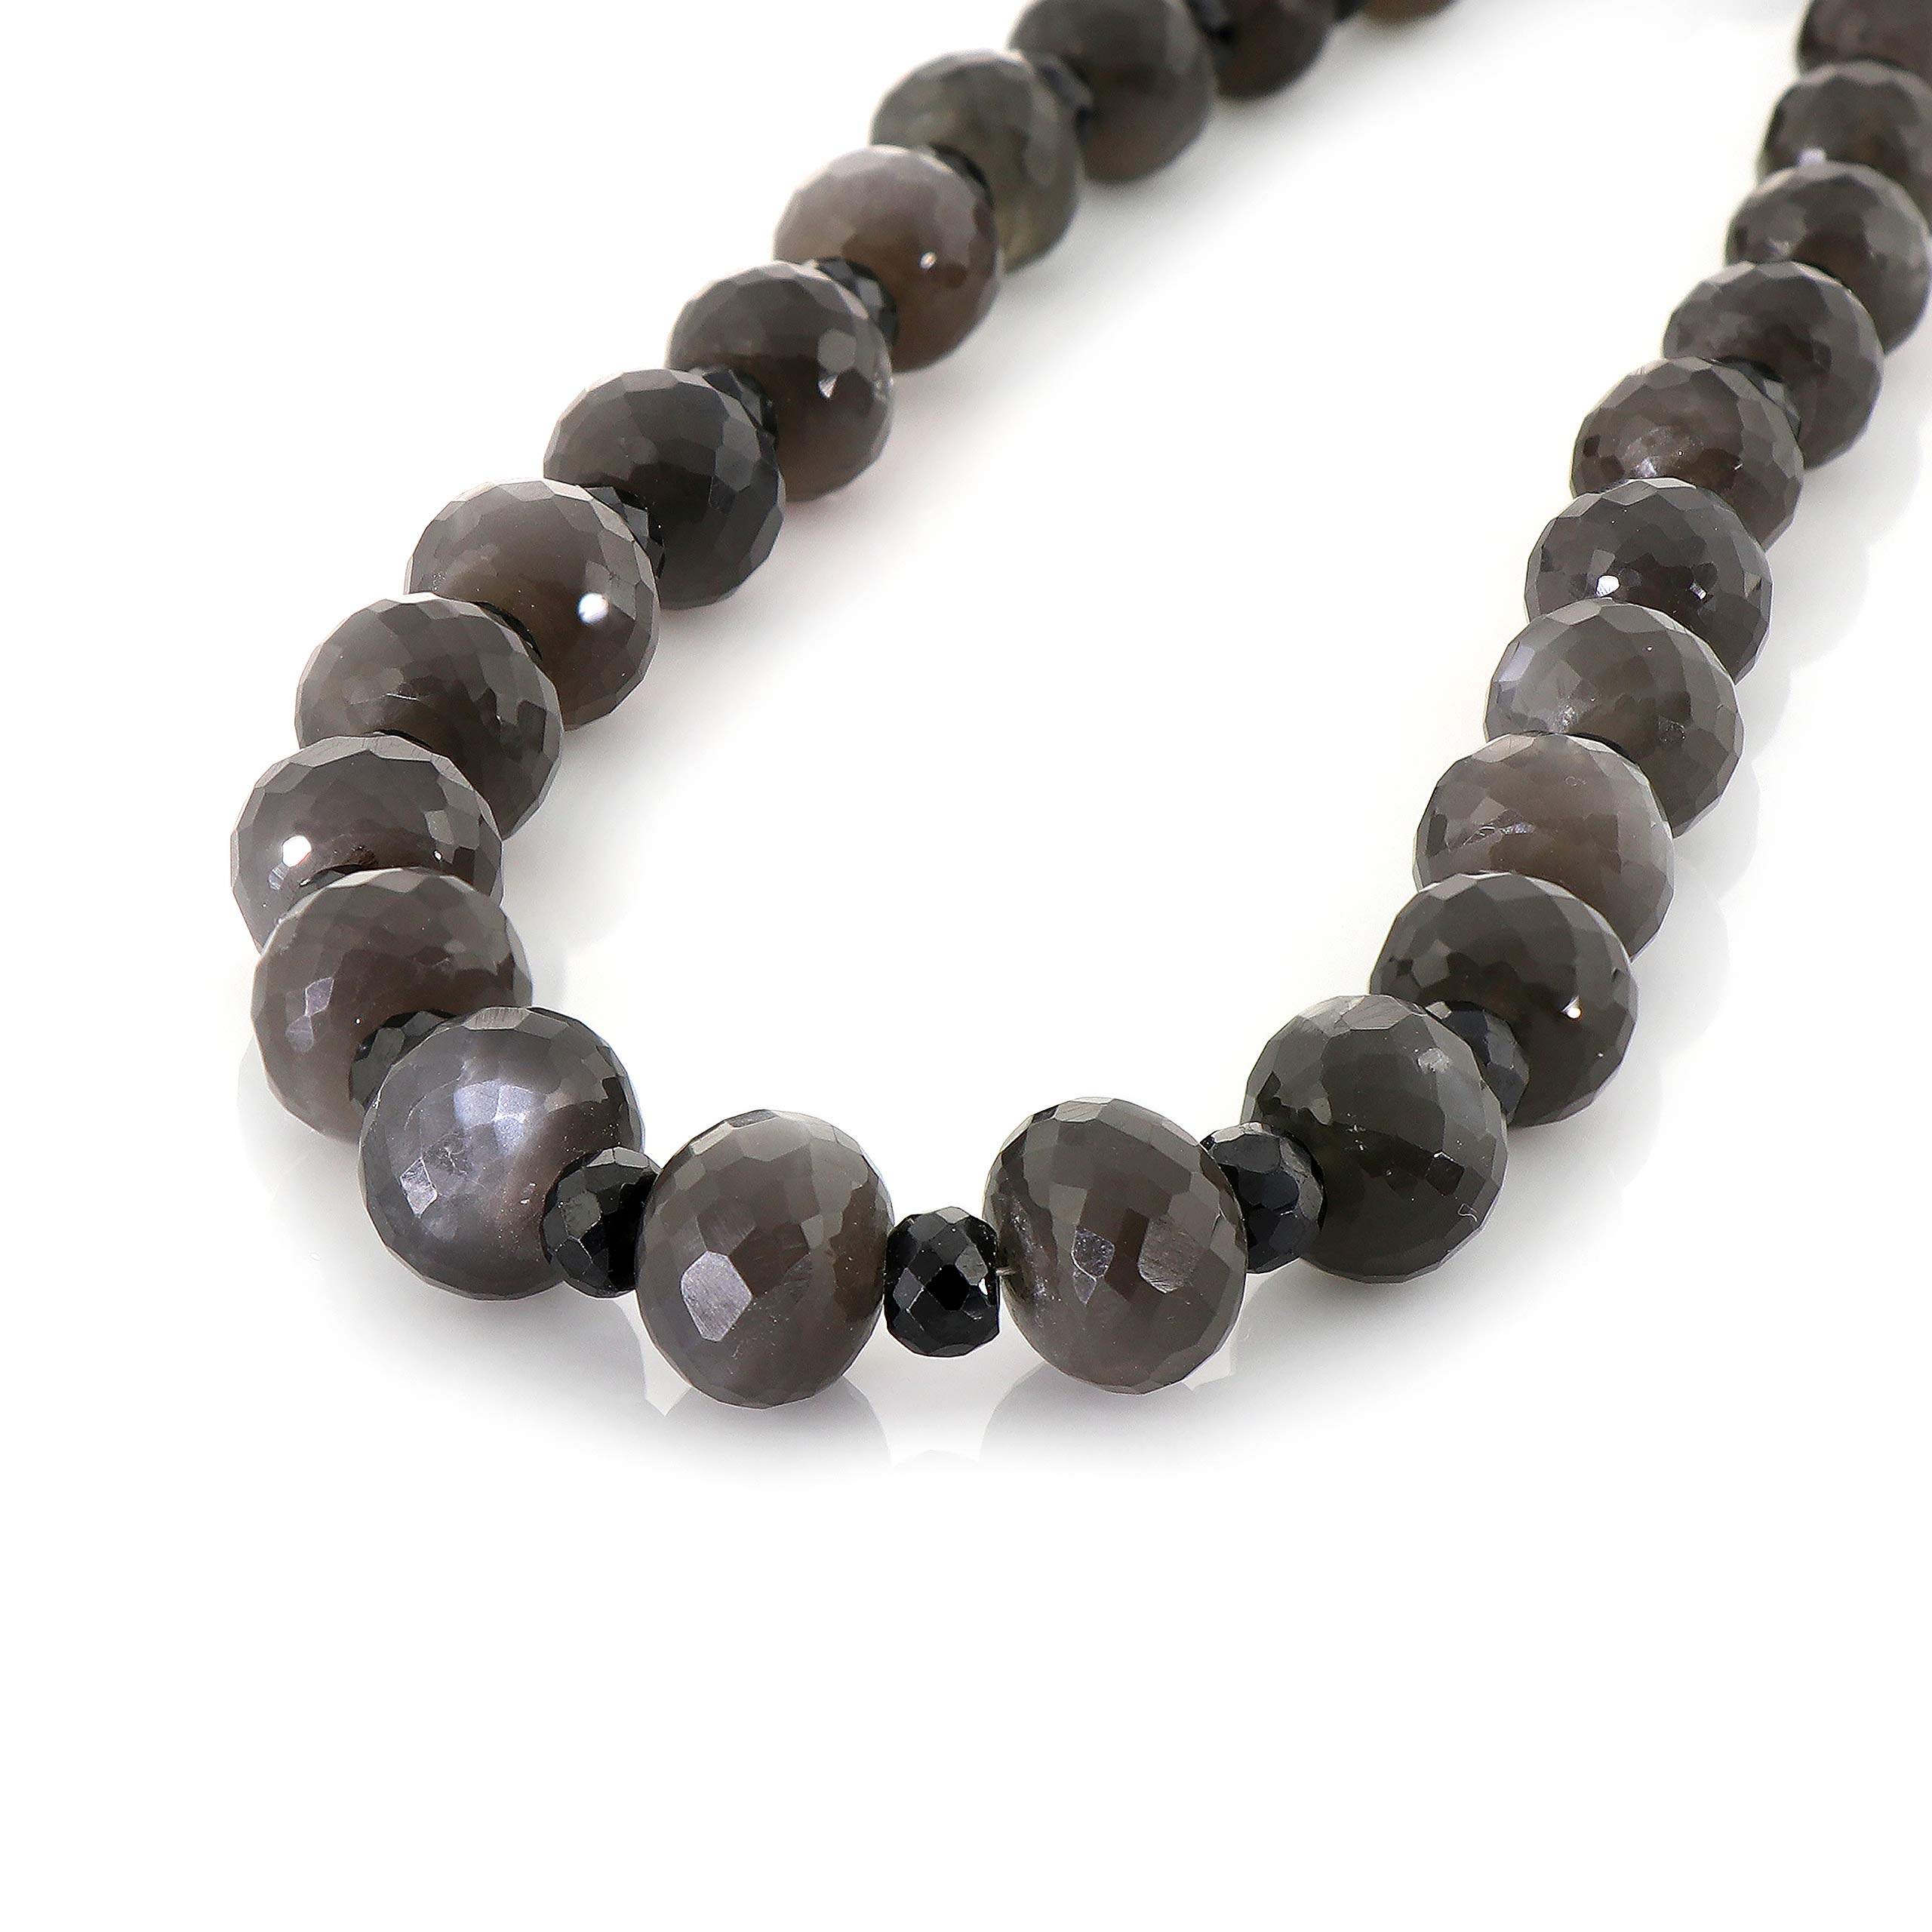 NirvanaIN Natural Grey Moonstone and Black Spinel Gemstone Beaded Necklace in Silver Best Gift for Women and Girls, Carat Weight 449.5 (Approx.)